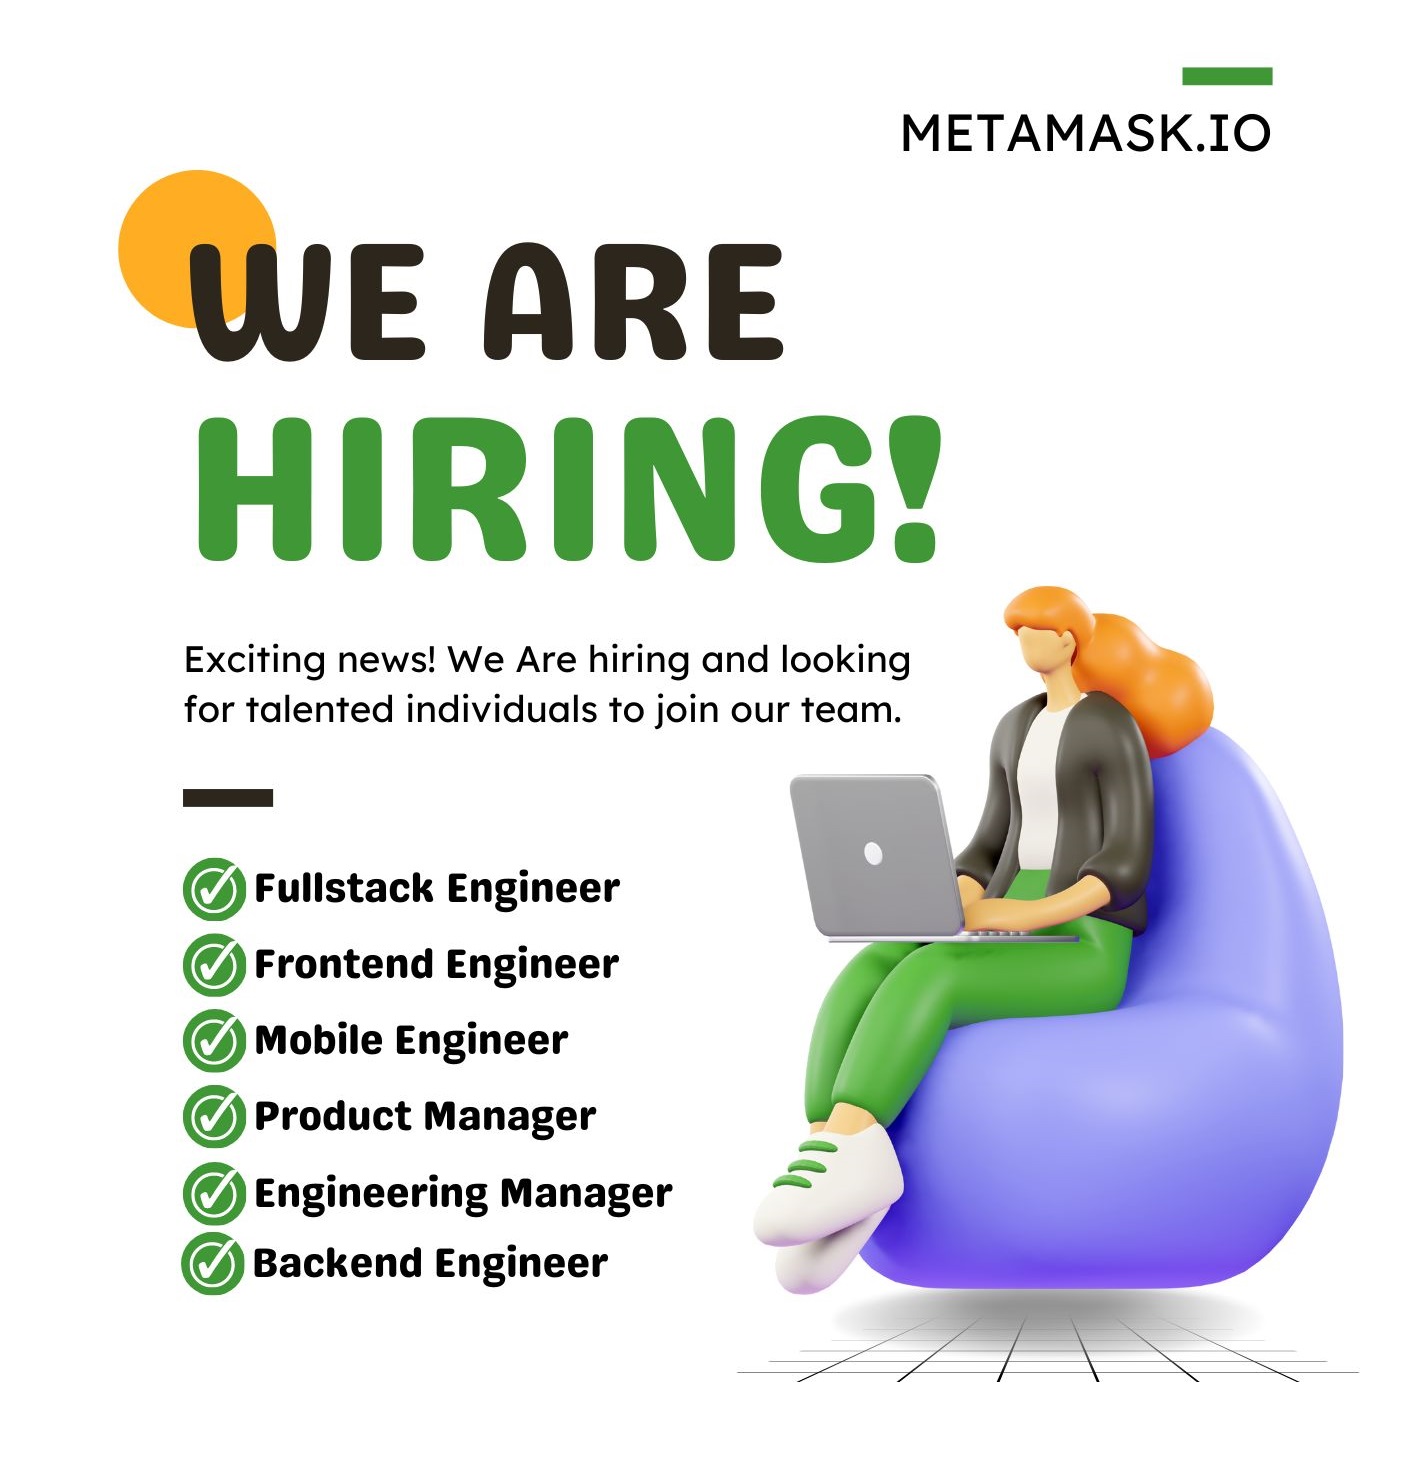 Remote Engineering Manager Needed at METAMASK